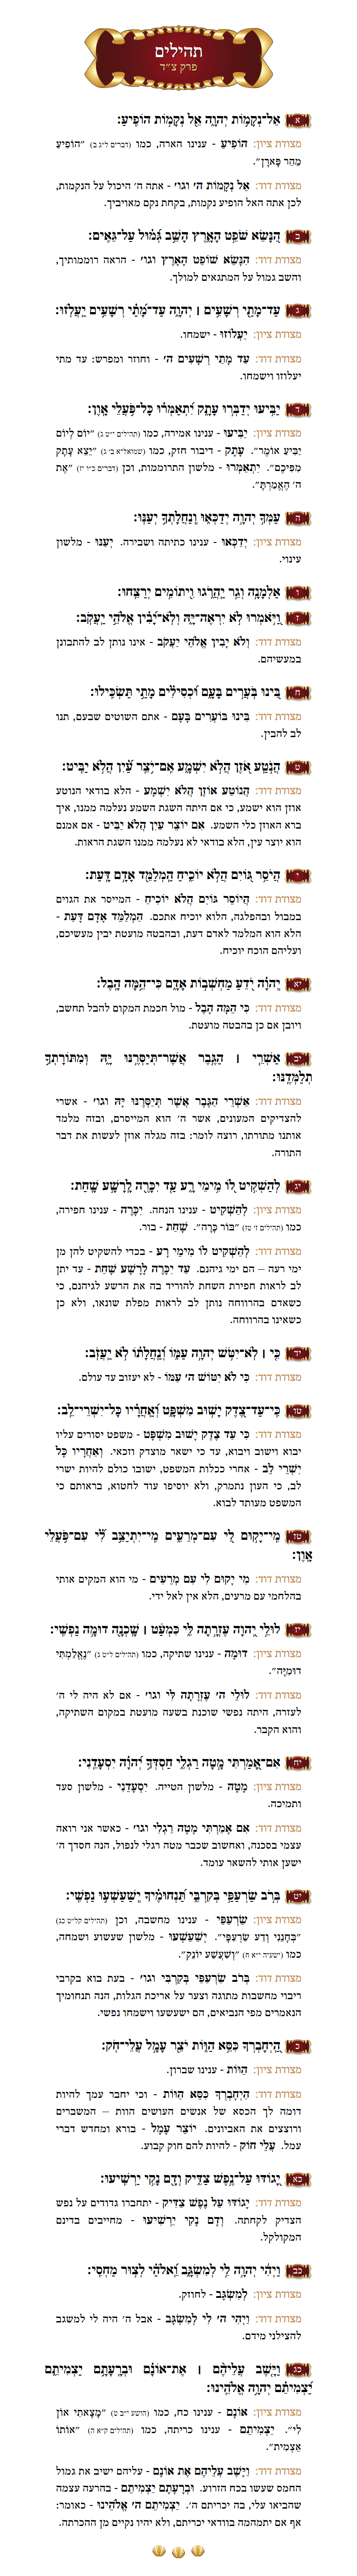 Sefer Tehillim Chapter 94 with commentary